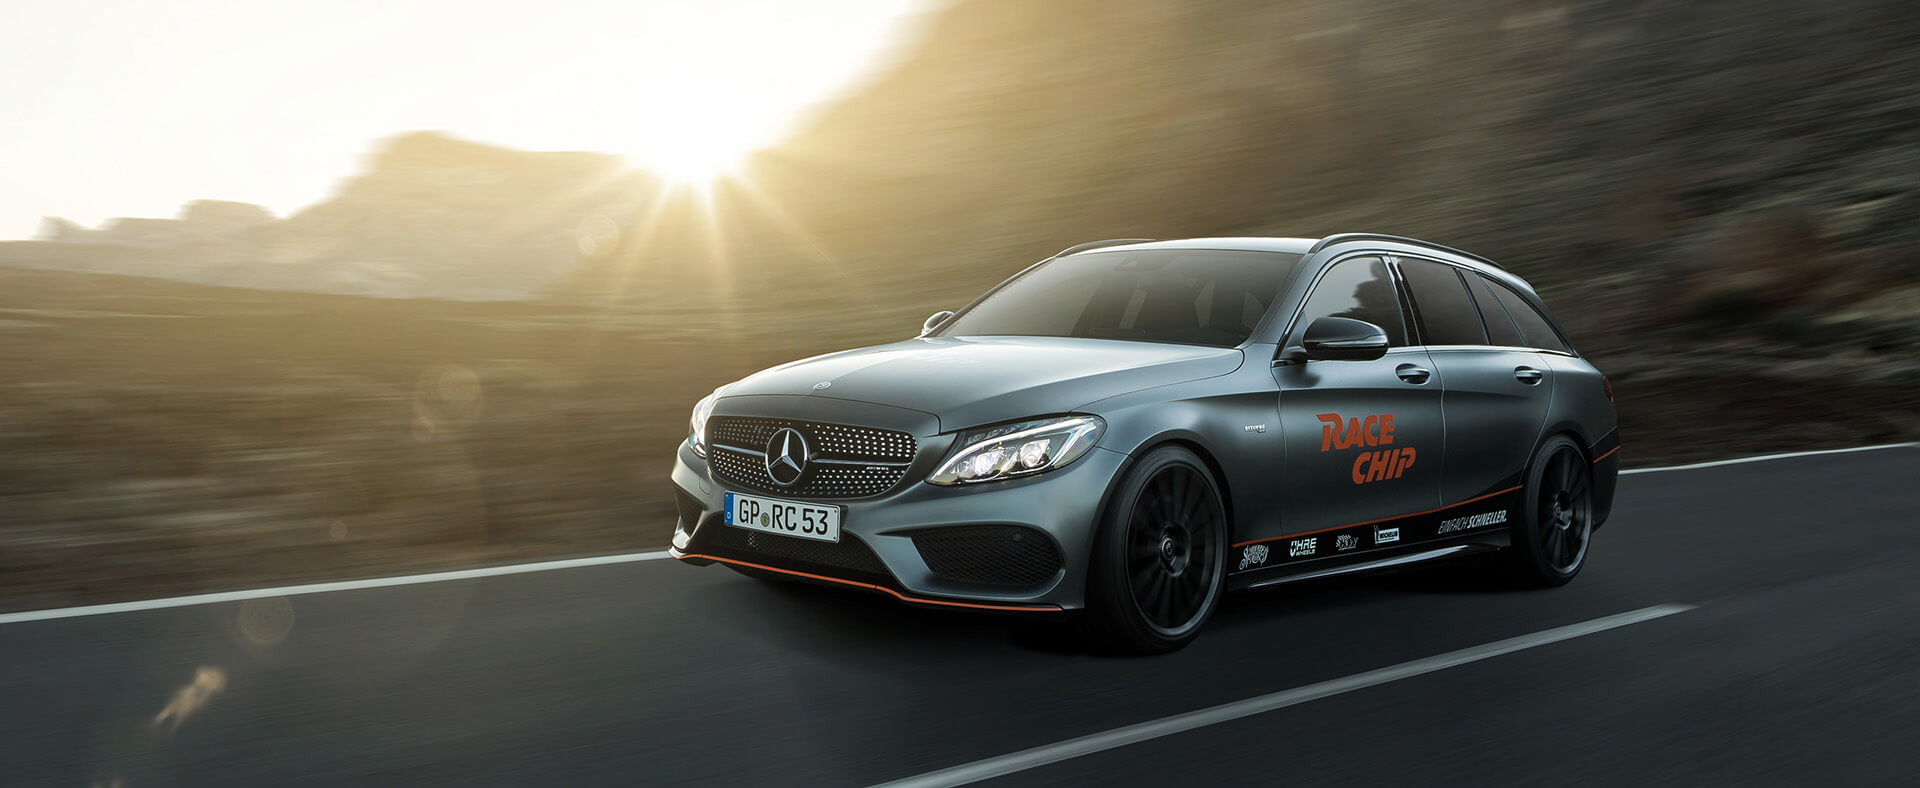 A station wagon with racing flair the Mercedes BenzAMG